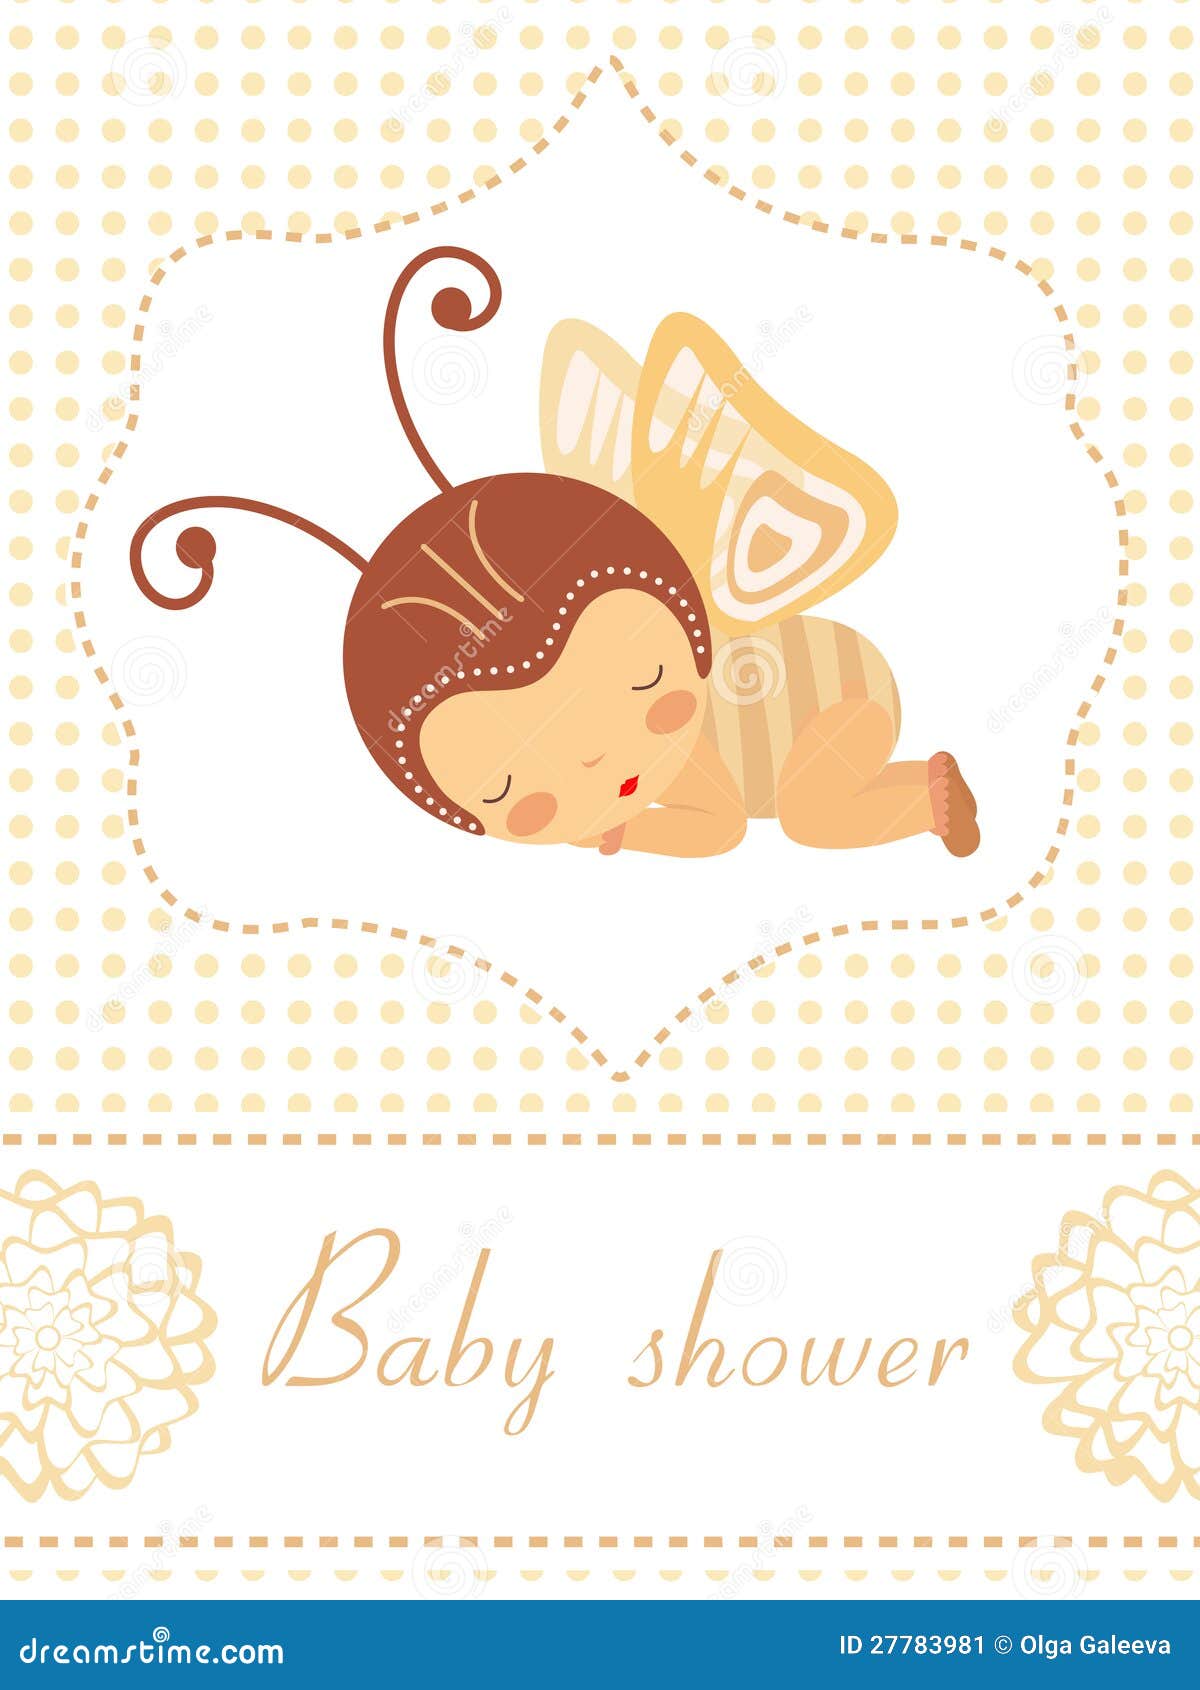 baby shower butterfly clipart - photo #21